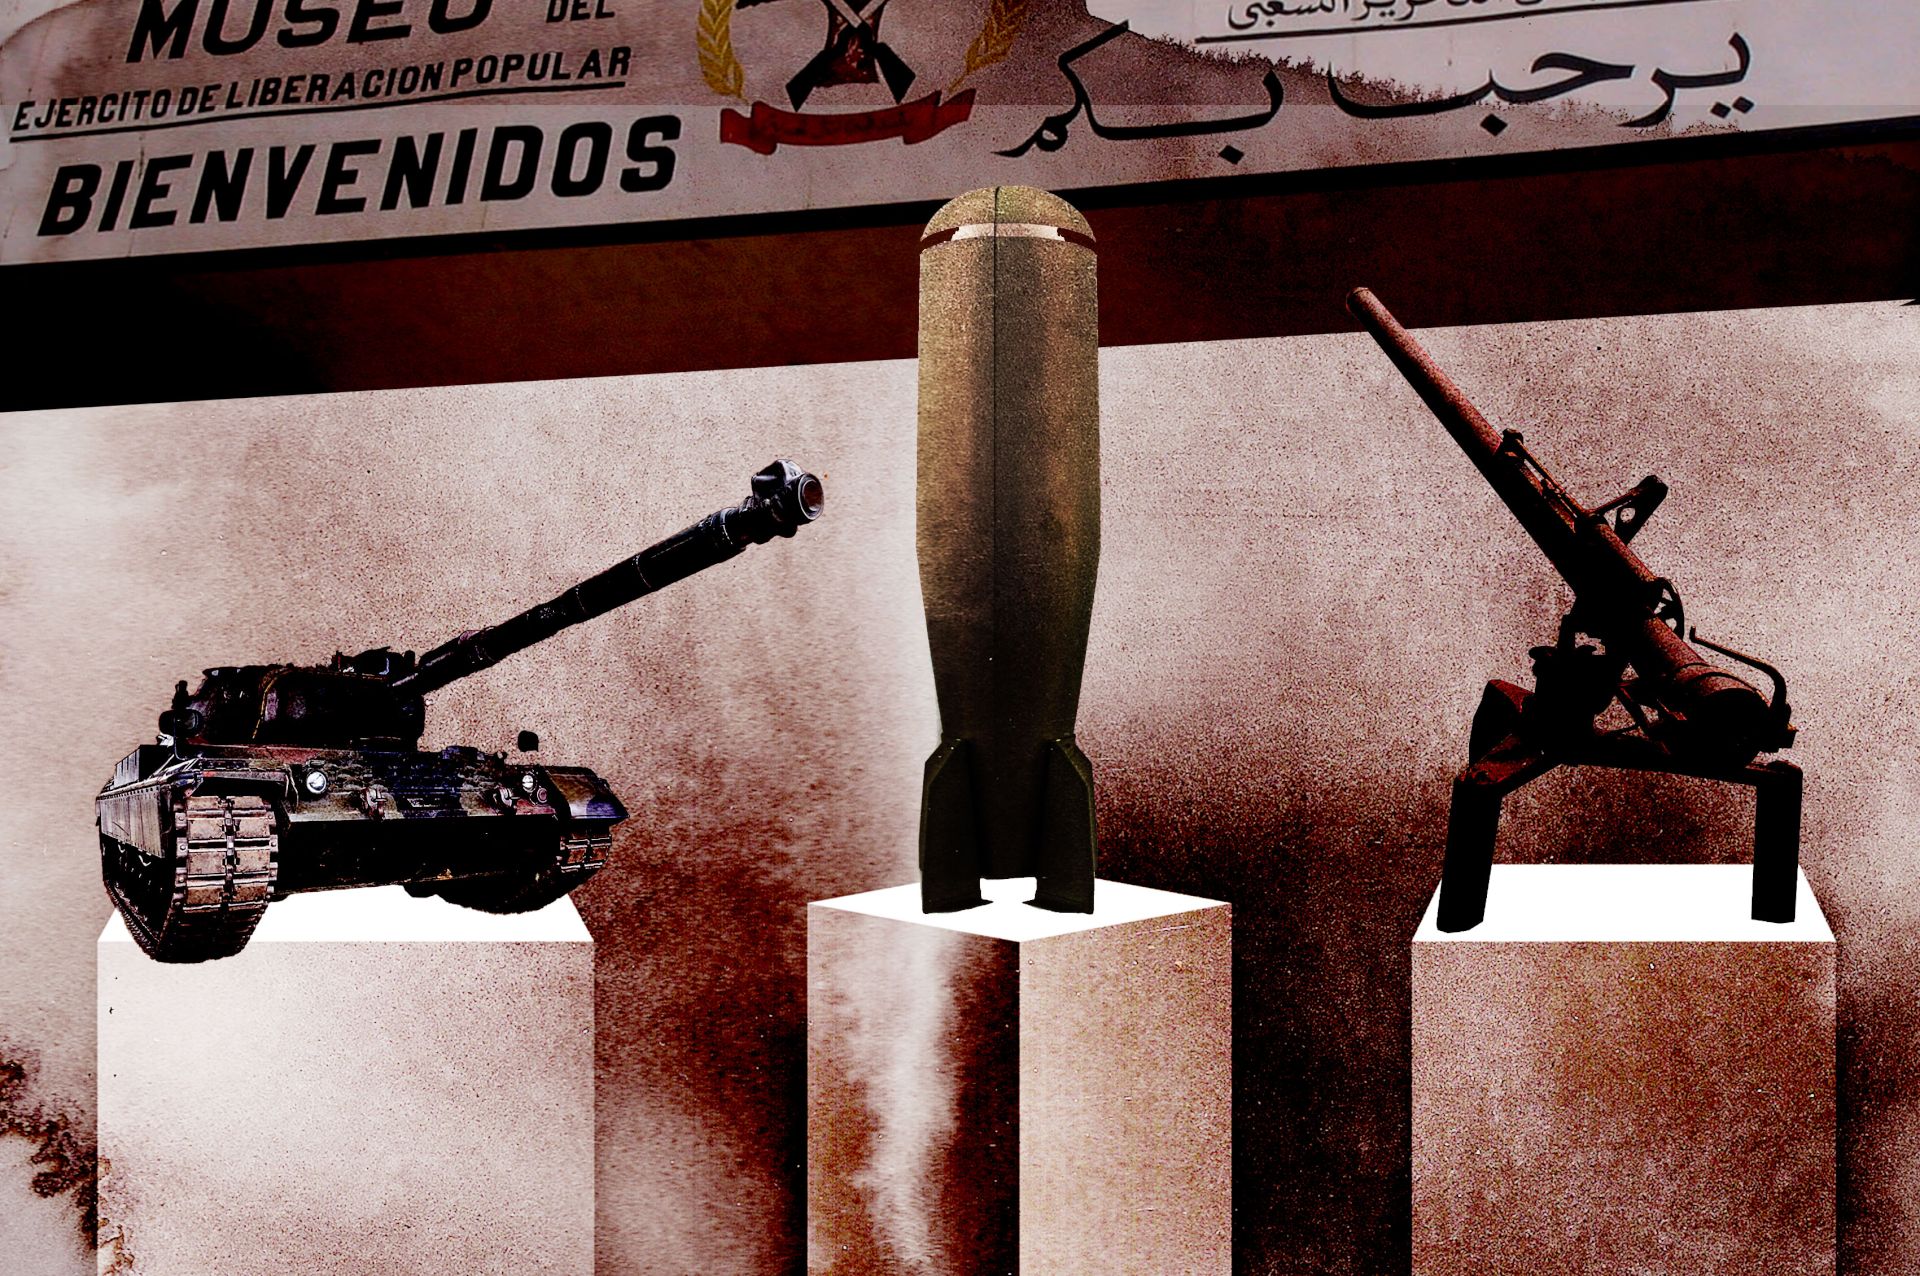 A Museum Documents in Real Time the War Between the Polisario Front and Morocco